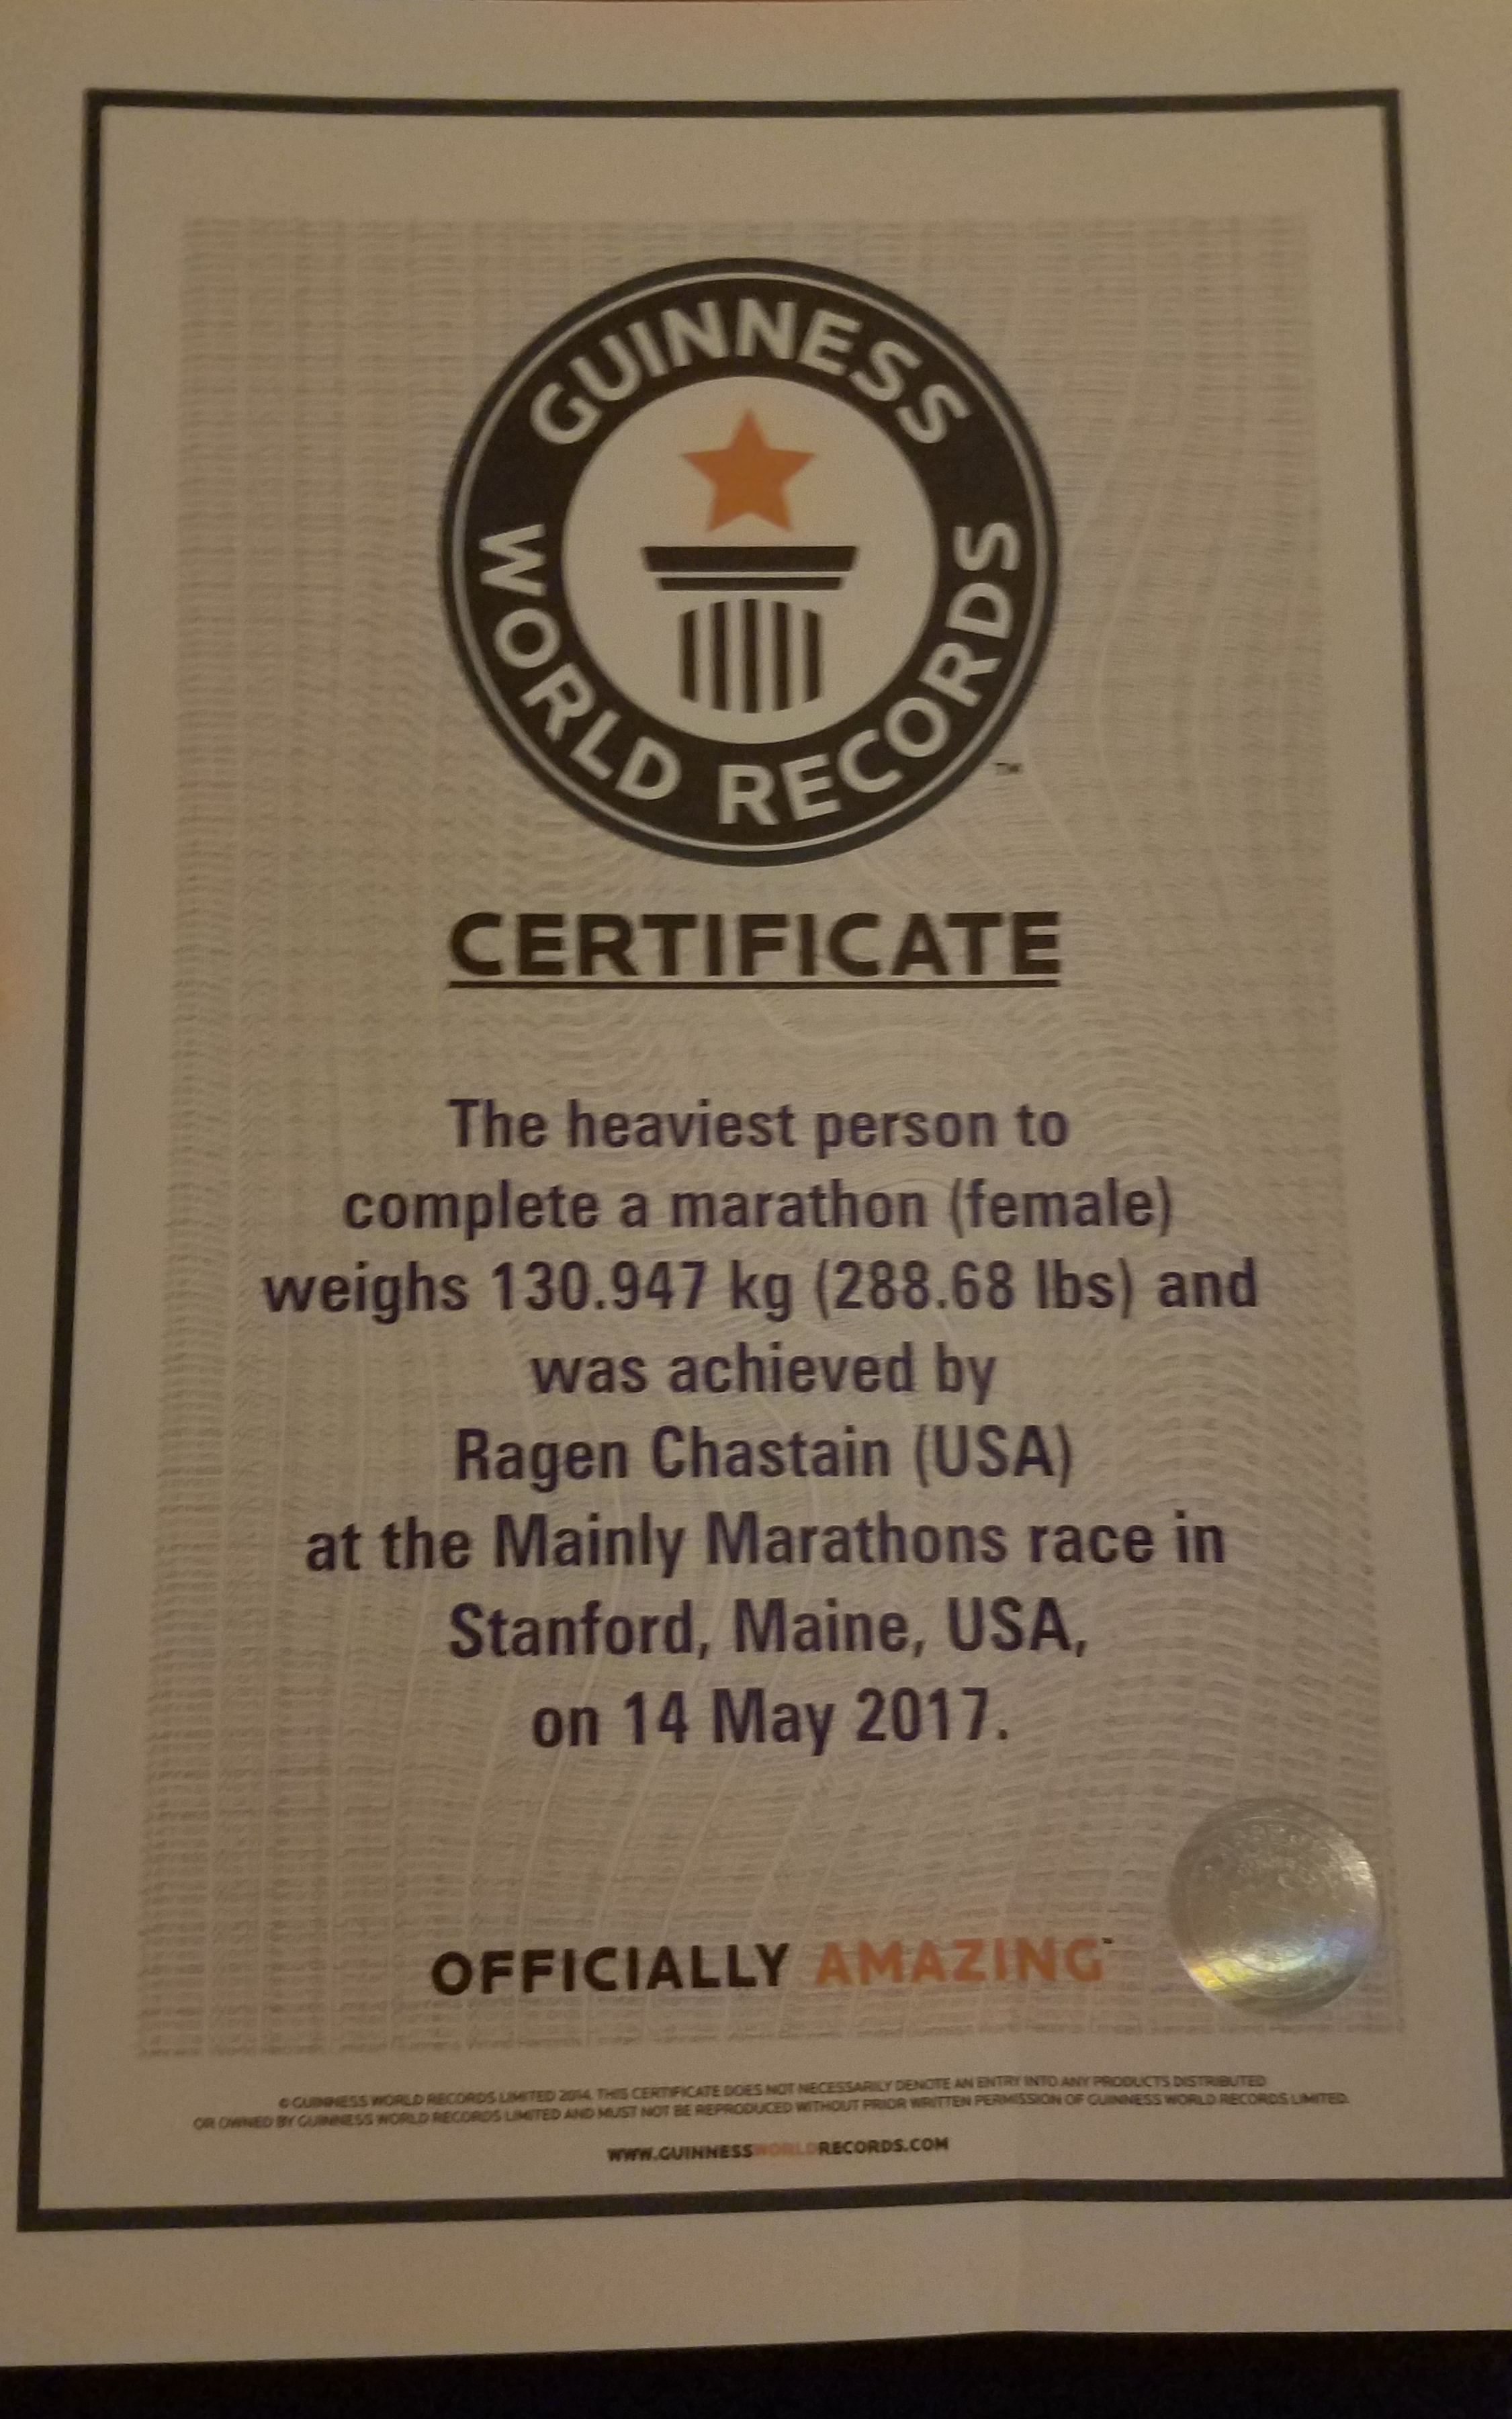 how does the guinness world record make money